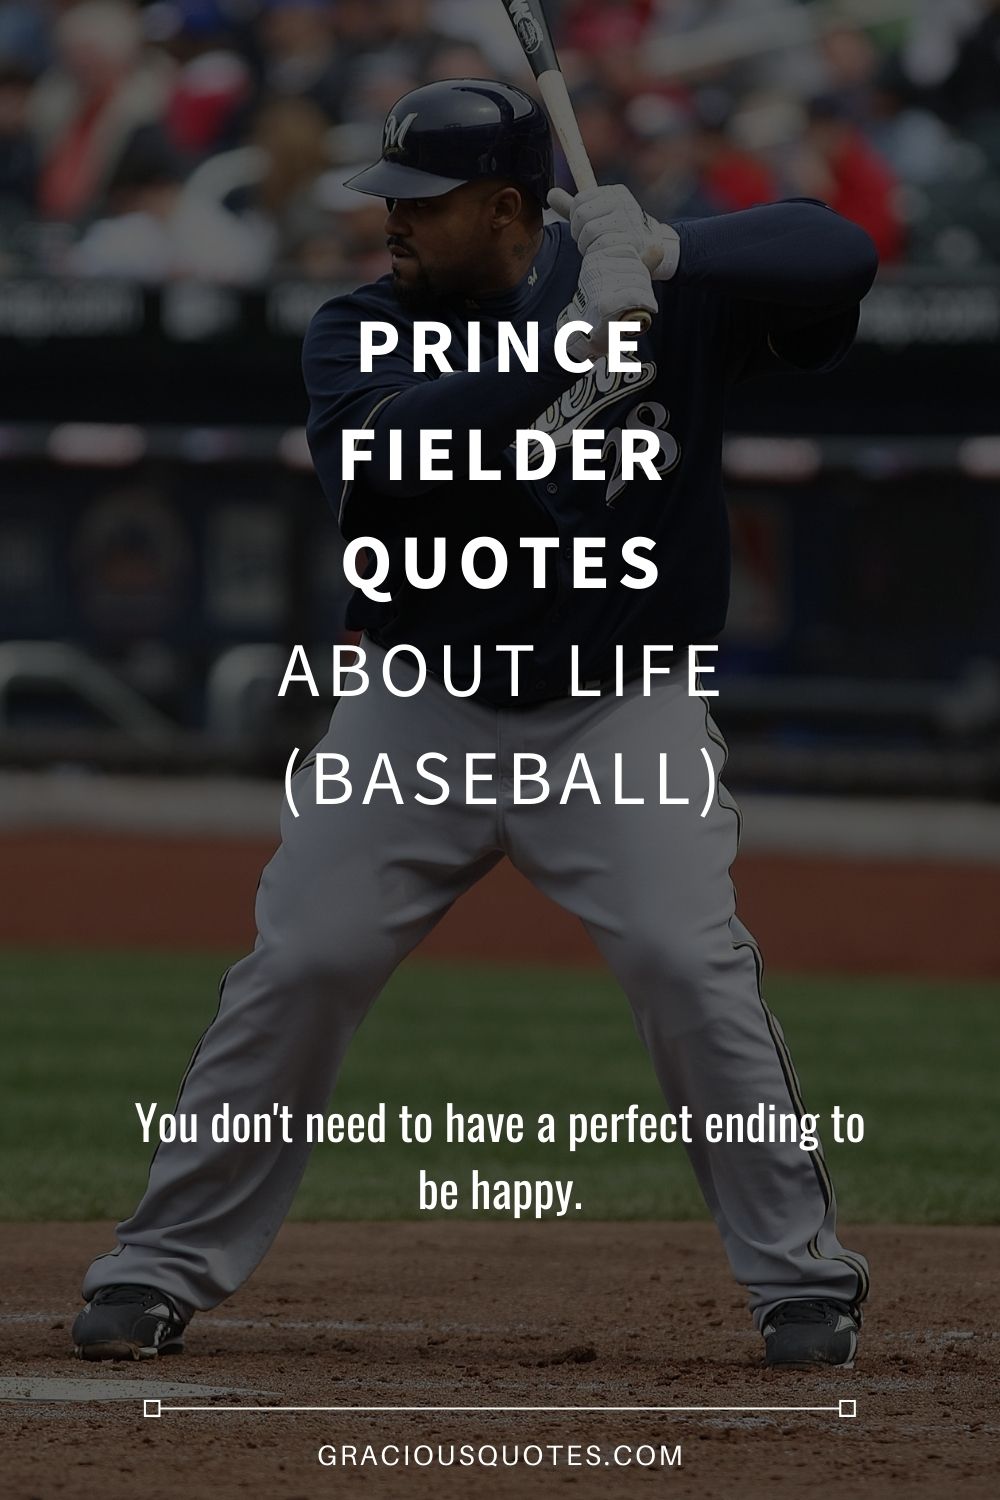 Prince Fielder Quotes About Life (BASEBALL) - Gracious Quotes